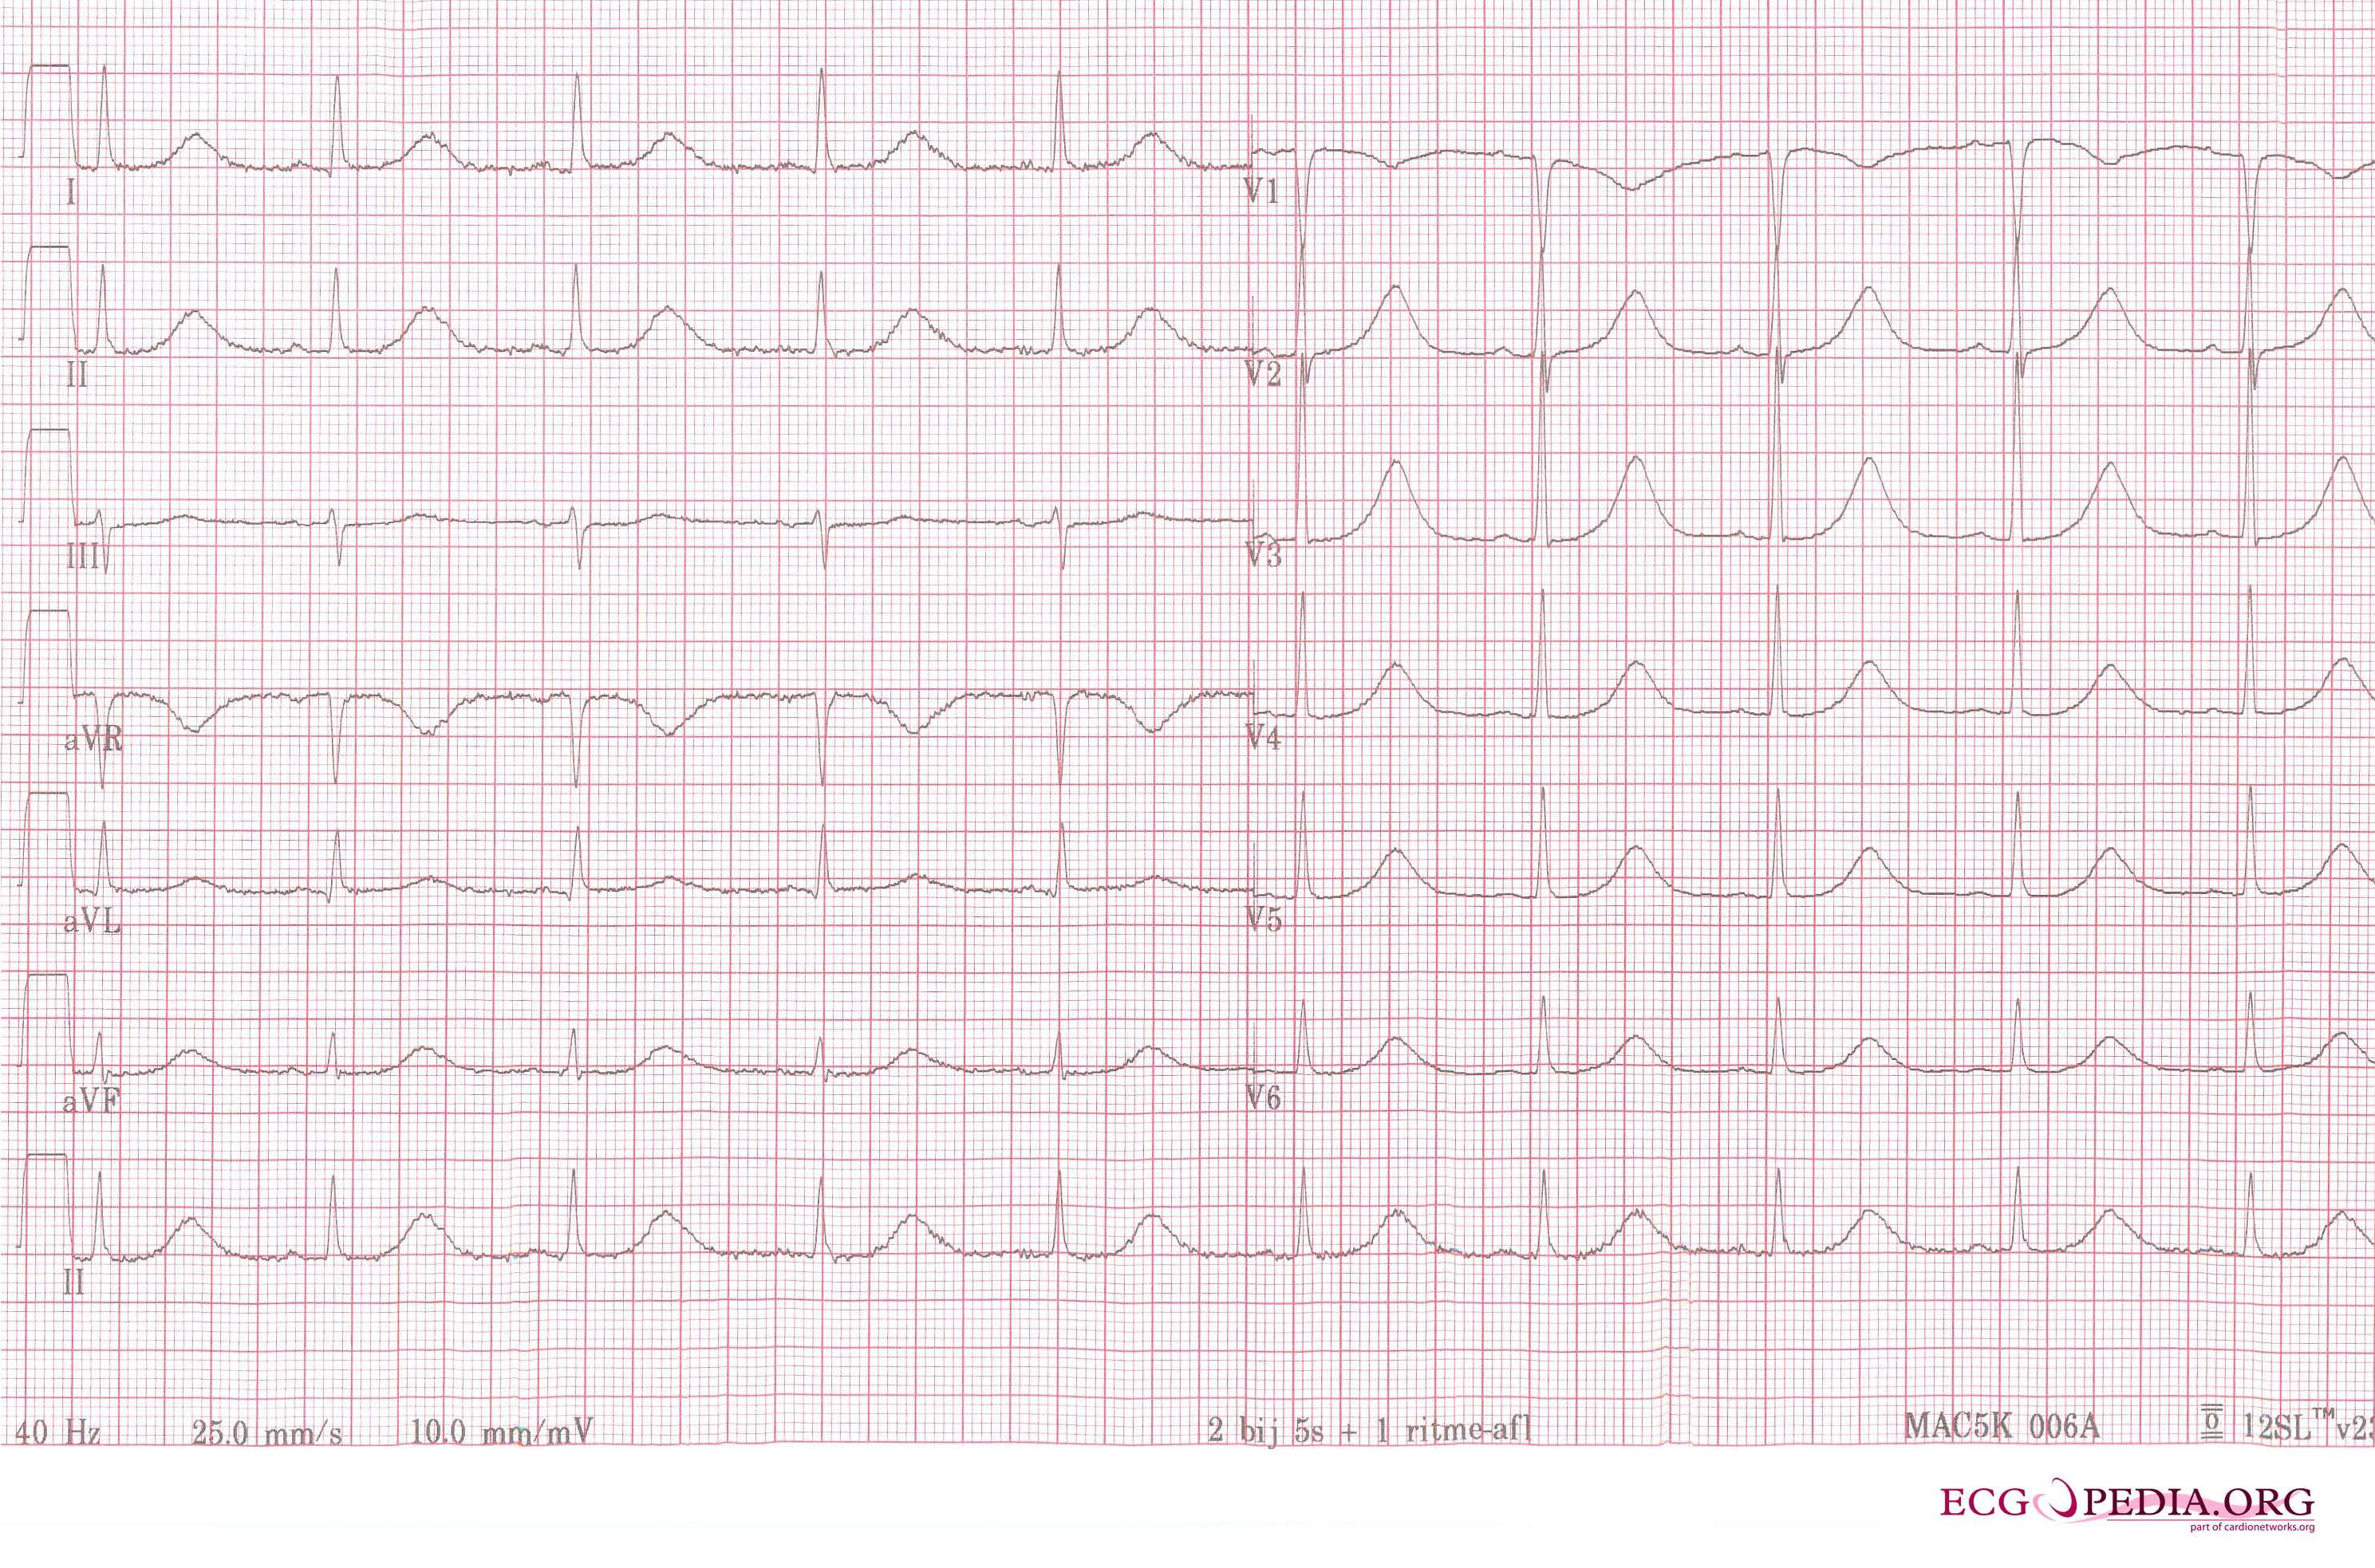 A 12 lead ECG of a patient with acquired long QT syndrome. Notice the QT prolongation. The QTc is about 640ms.